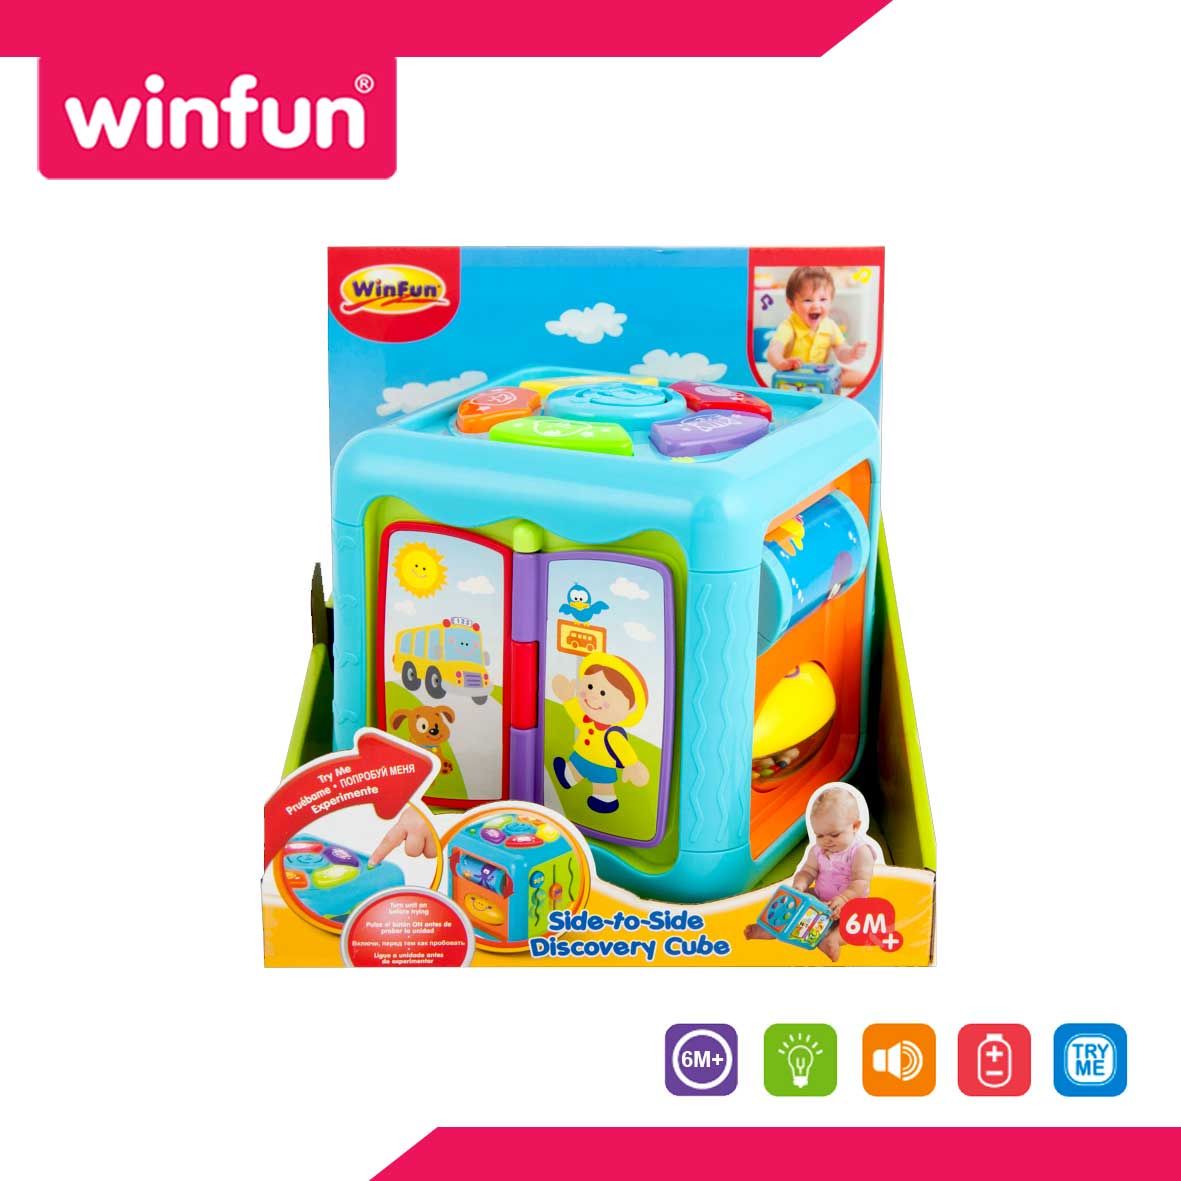 Winfun Side-to-Side Discovery Cube - 5